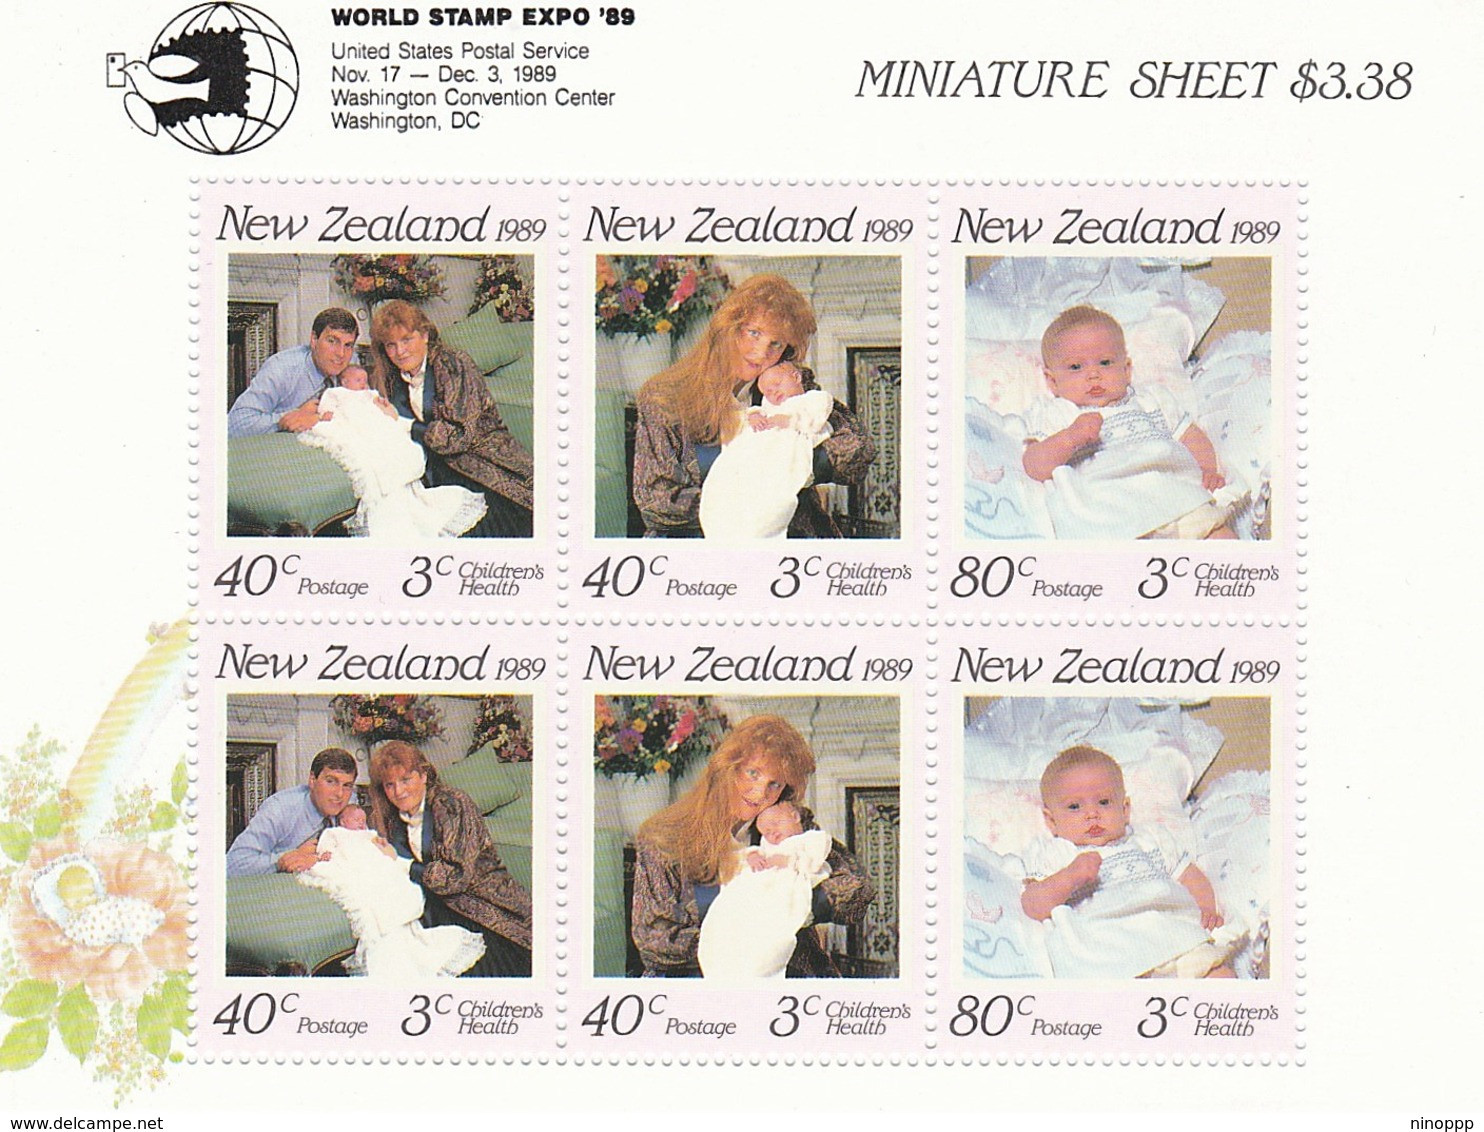 New Zealand SG MS 1519a 1989 Royal Family Health, Miniature Sheet,Overprinted World Expo'89, Mint Never Hinged - Neufs